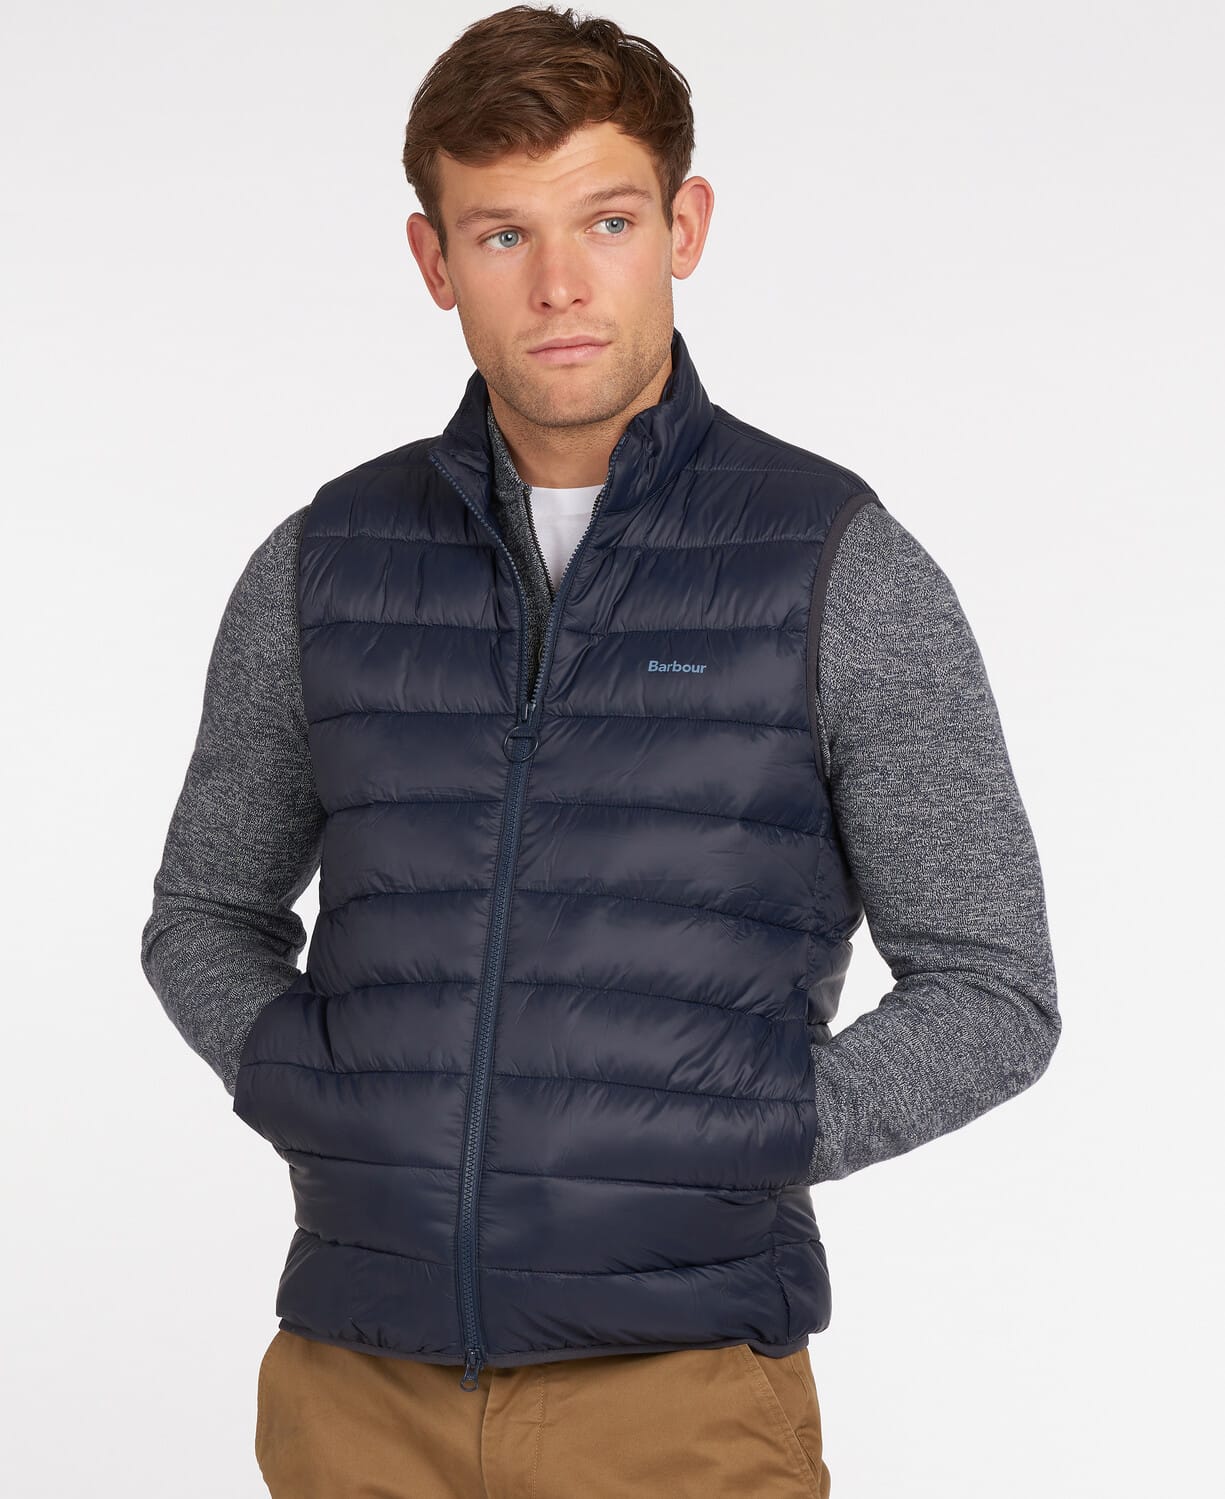 Bretby Gilet Navy - Out and About